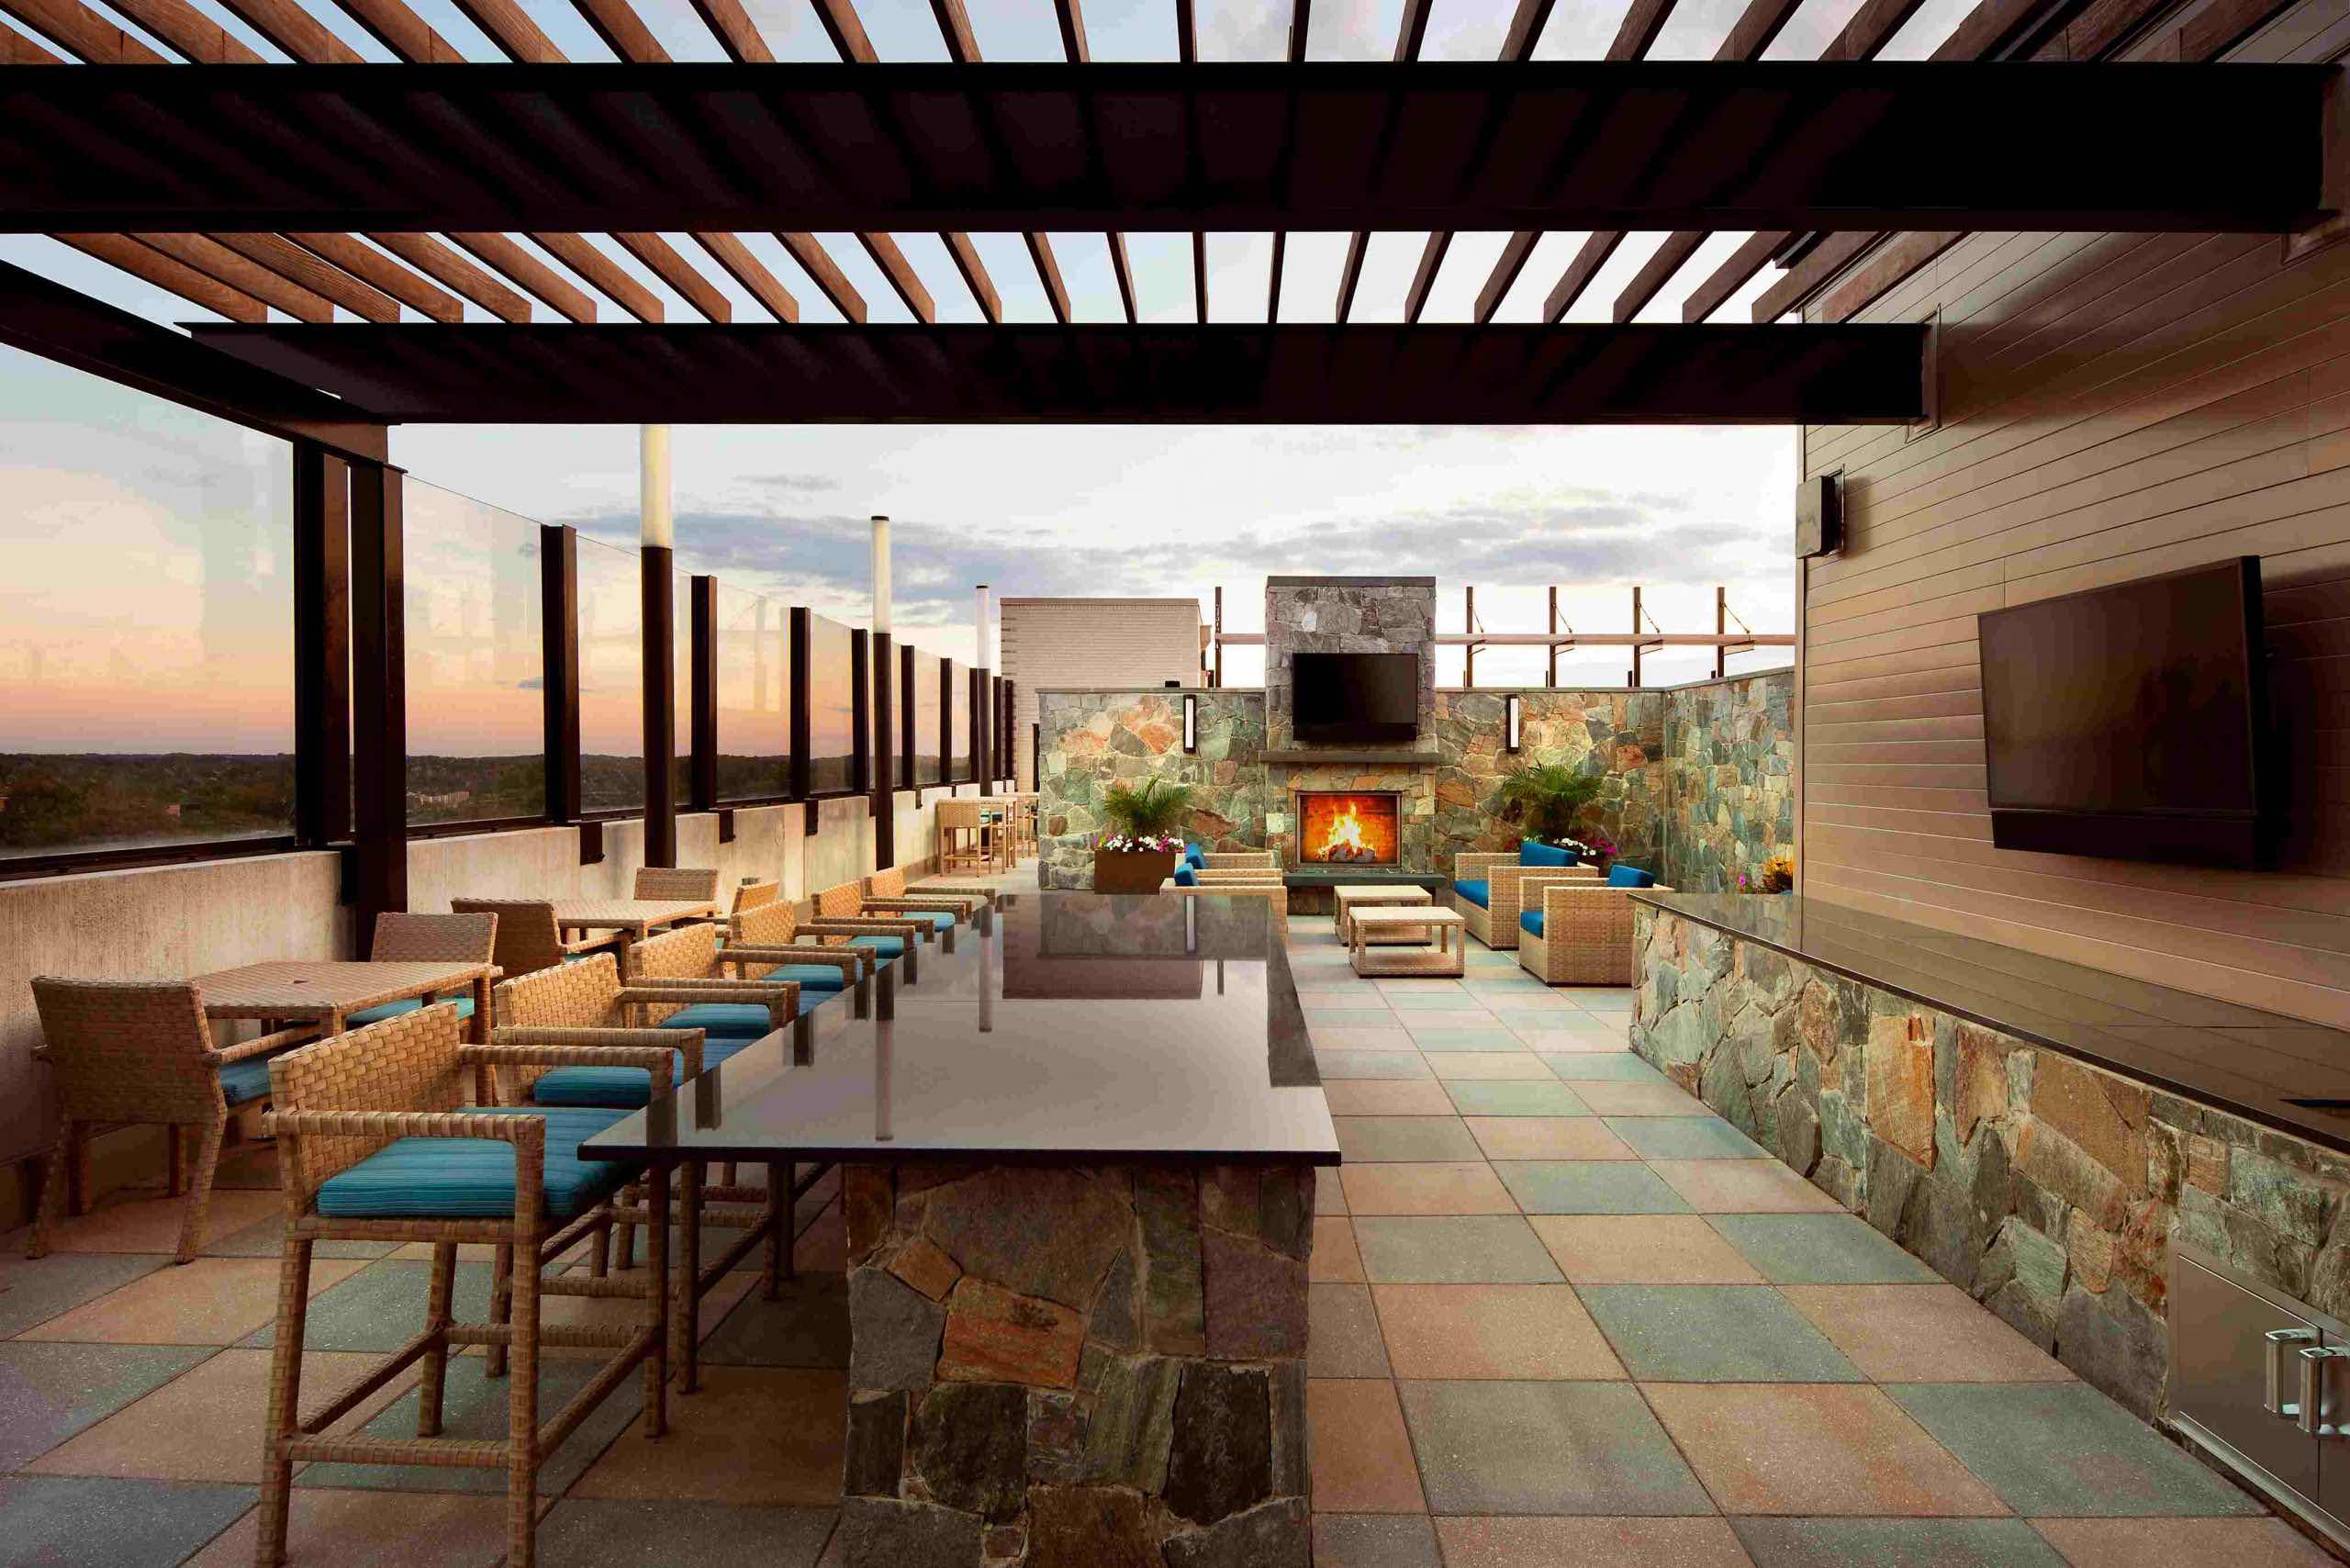 Faraday Park rooftop featuring a bar, tables, lounge chairs, multiple televisions, and fireplace